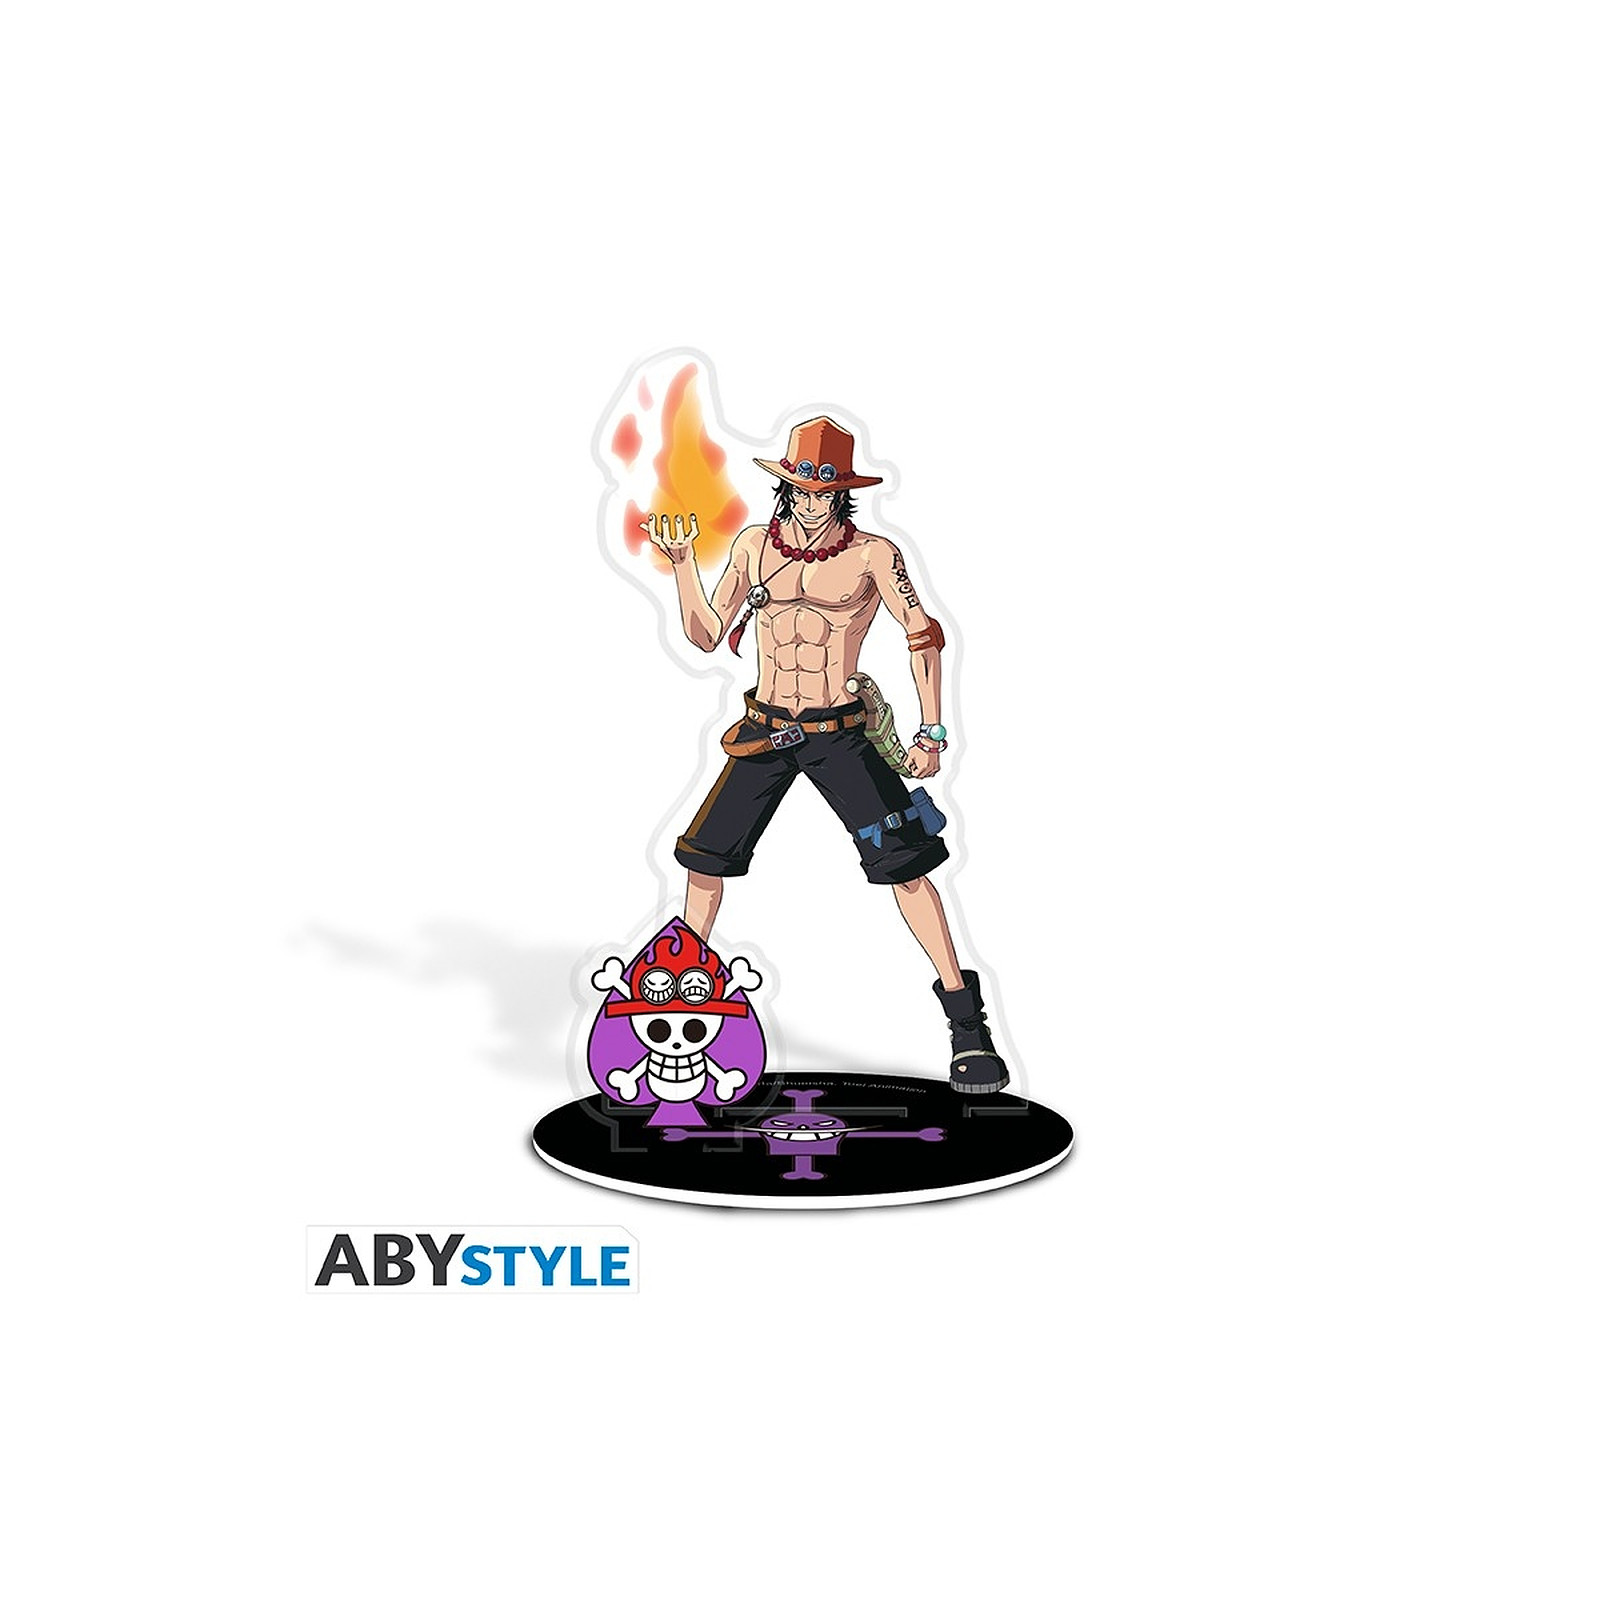 One Piece - Acryl Portgas D. Ace - Figurines Abystyle